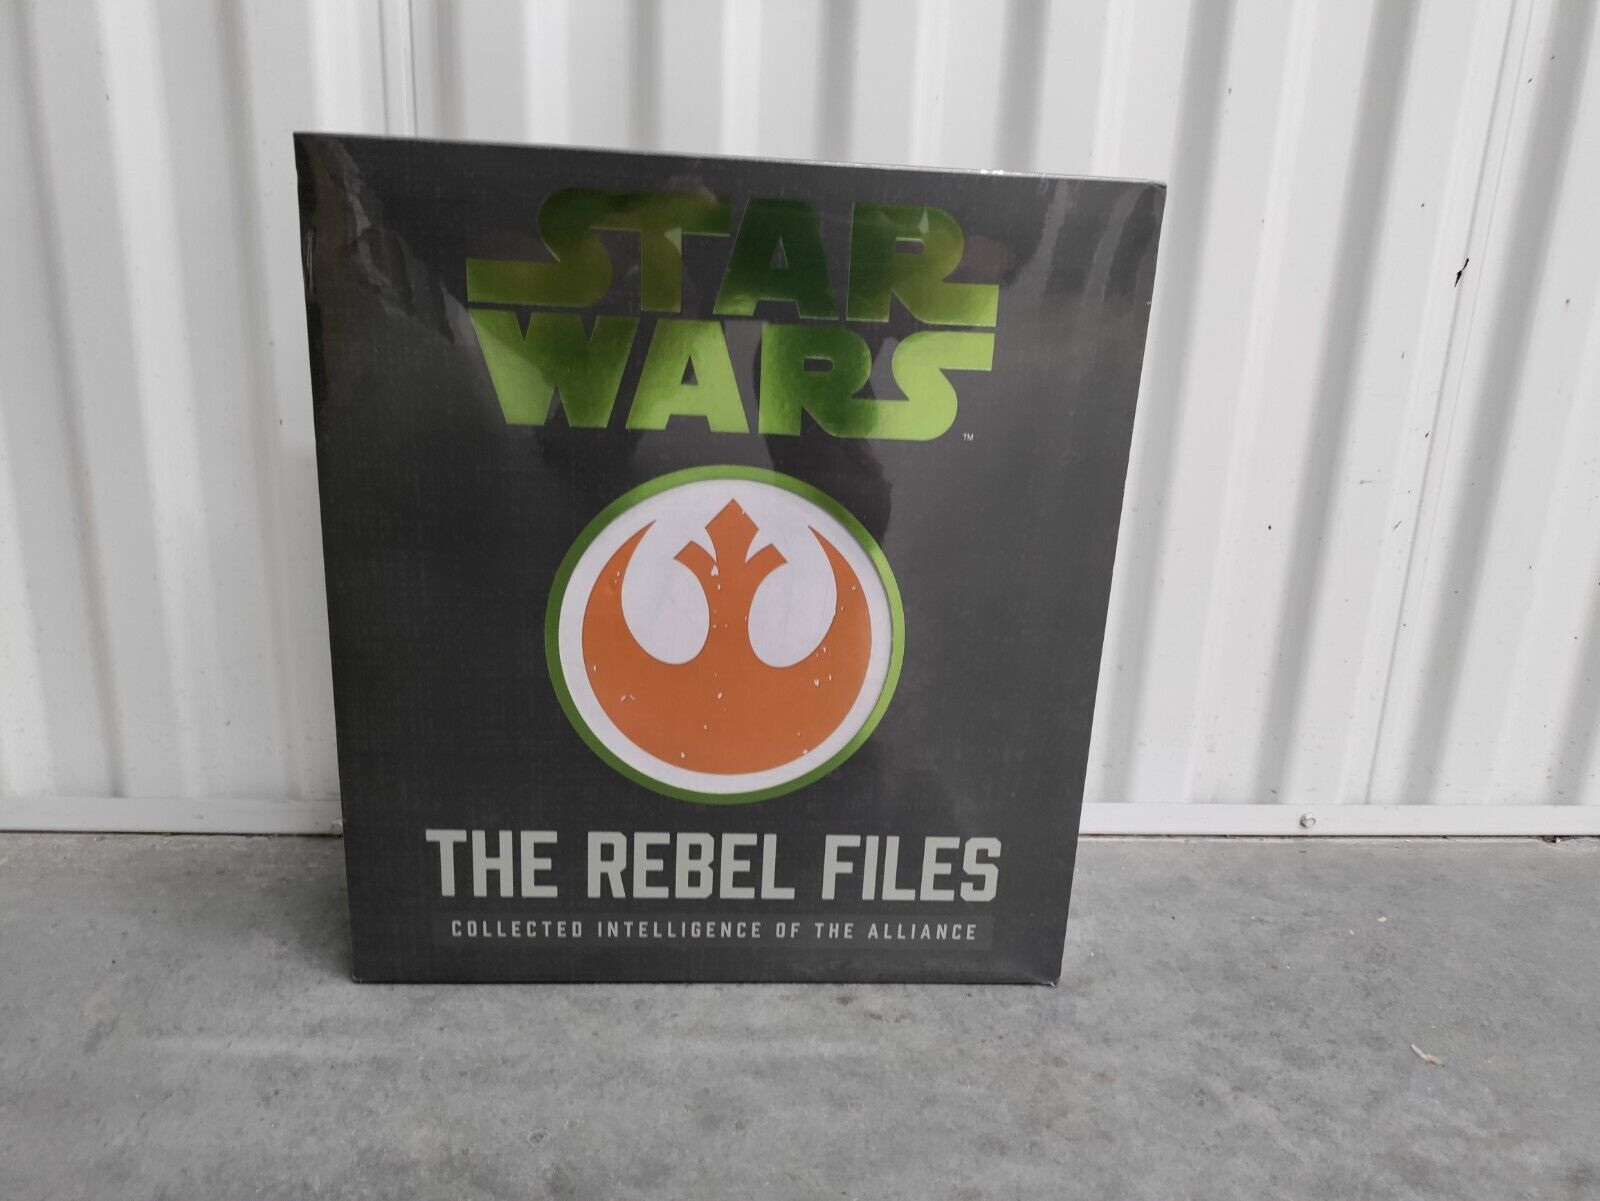 Star Wars The Rebel Files Collected Intelligence of the Alliance Book Documents